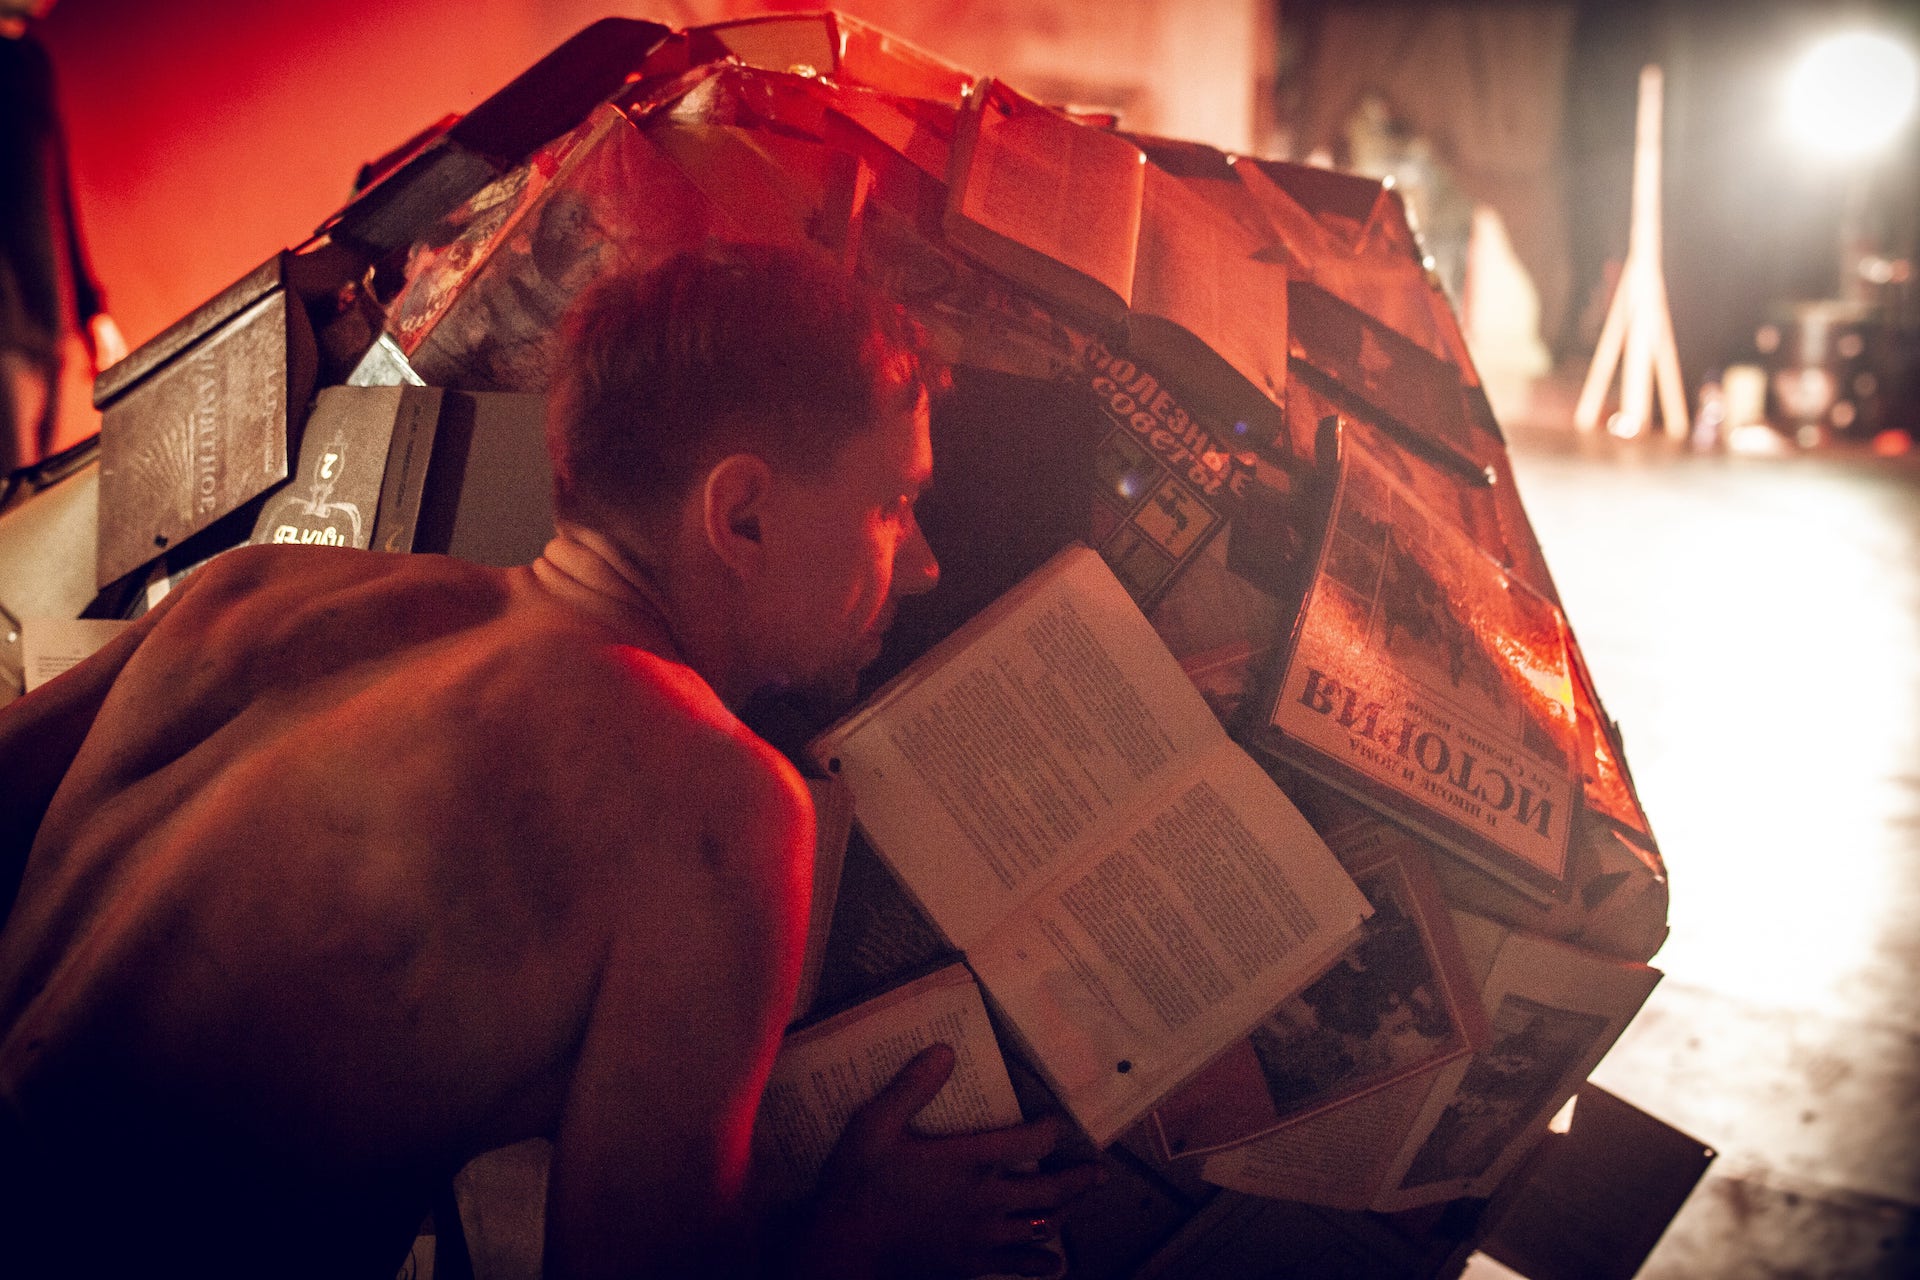 A shirtless performer is lying on a pile of books